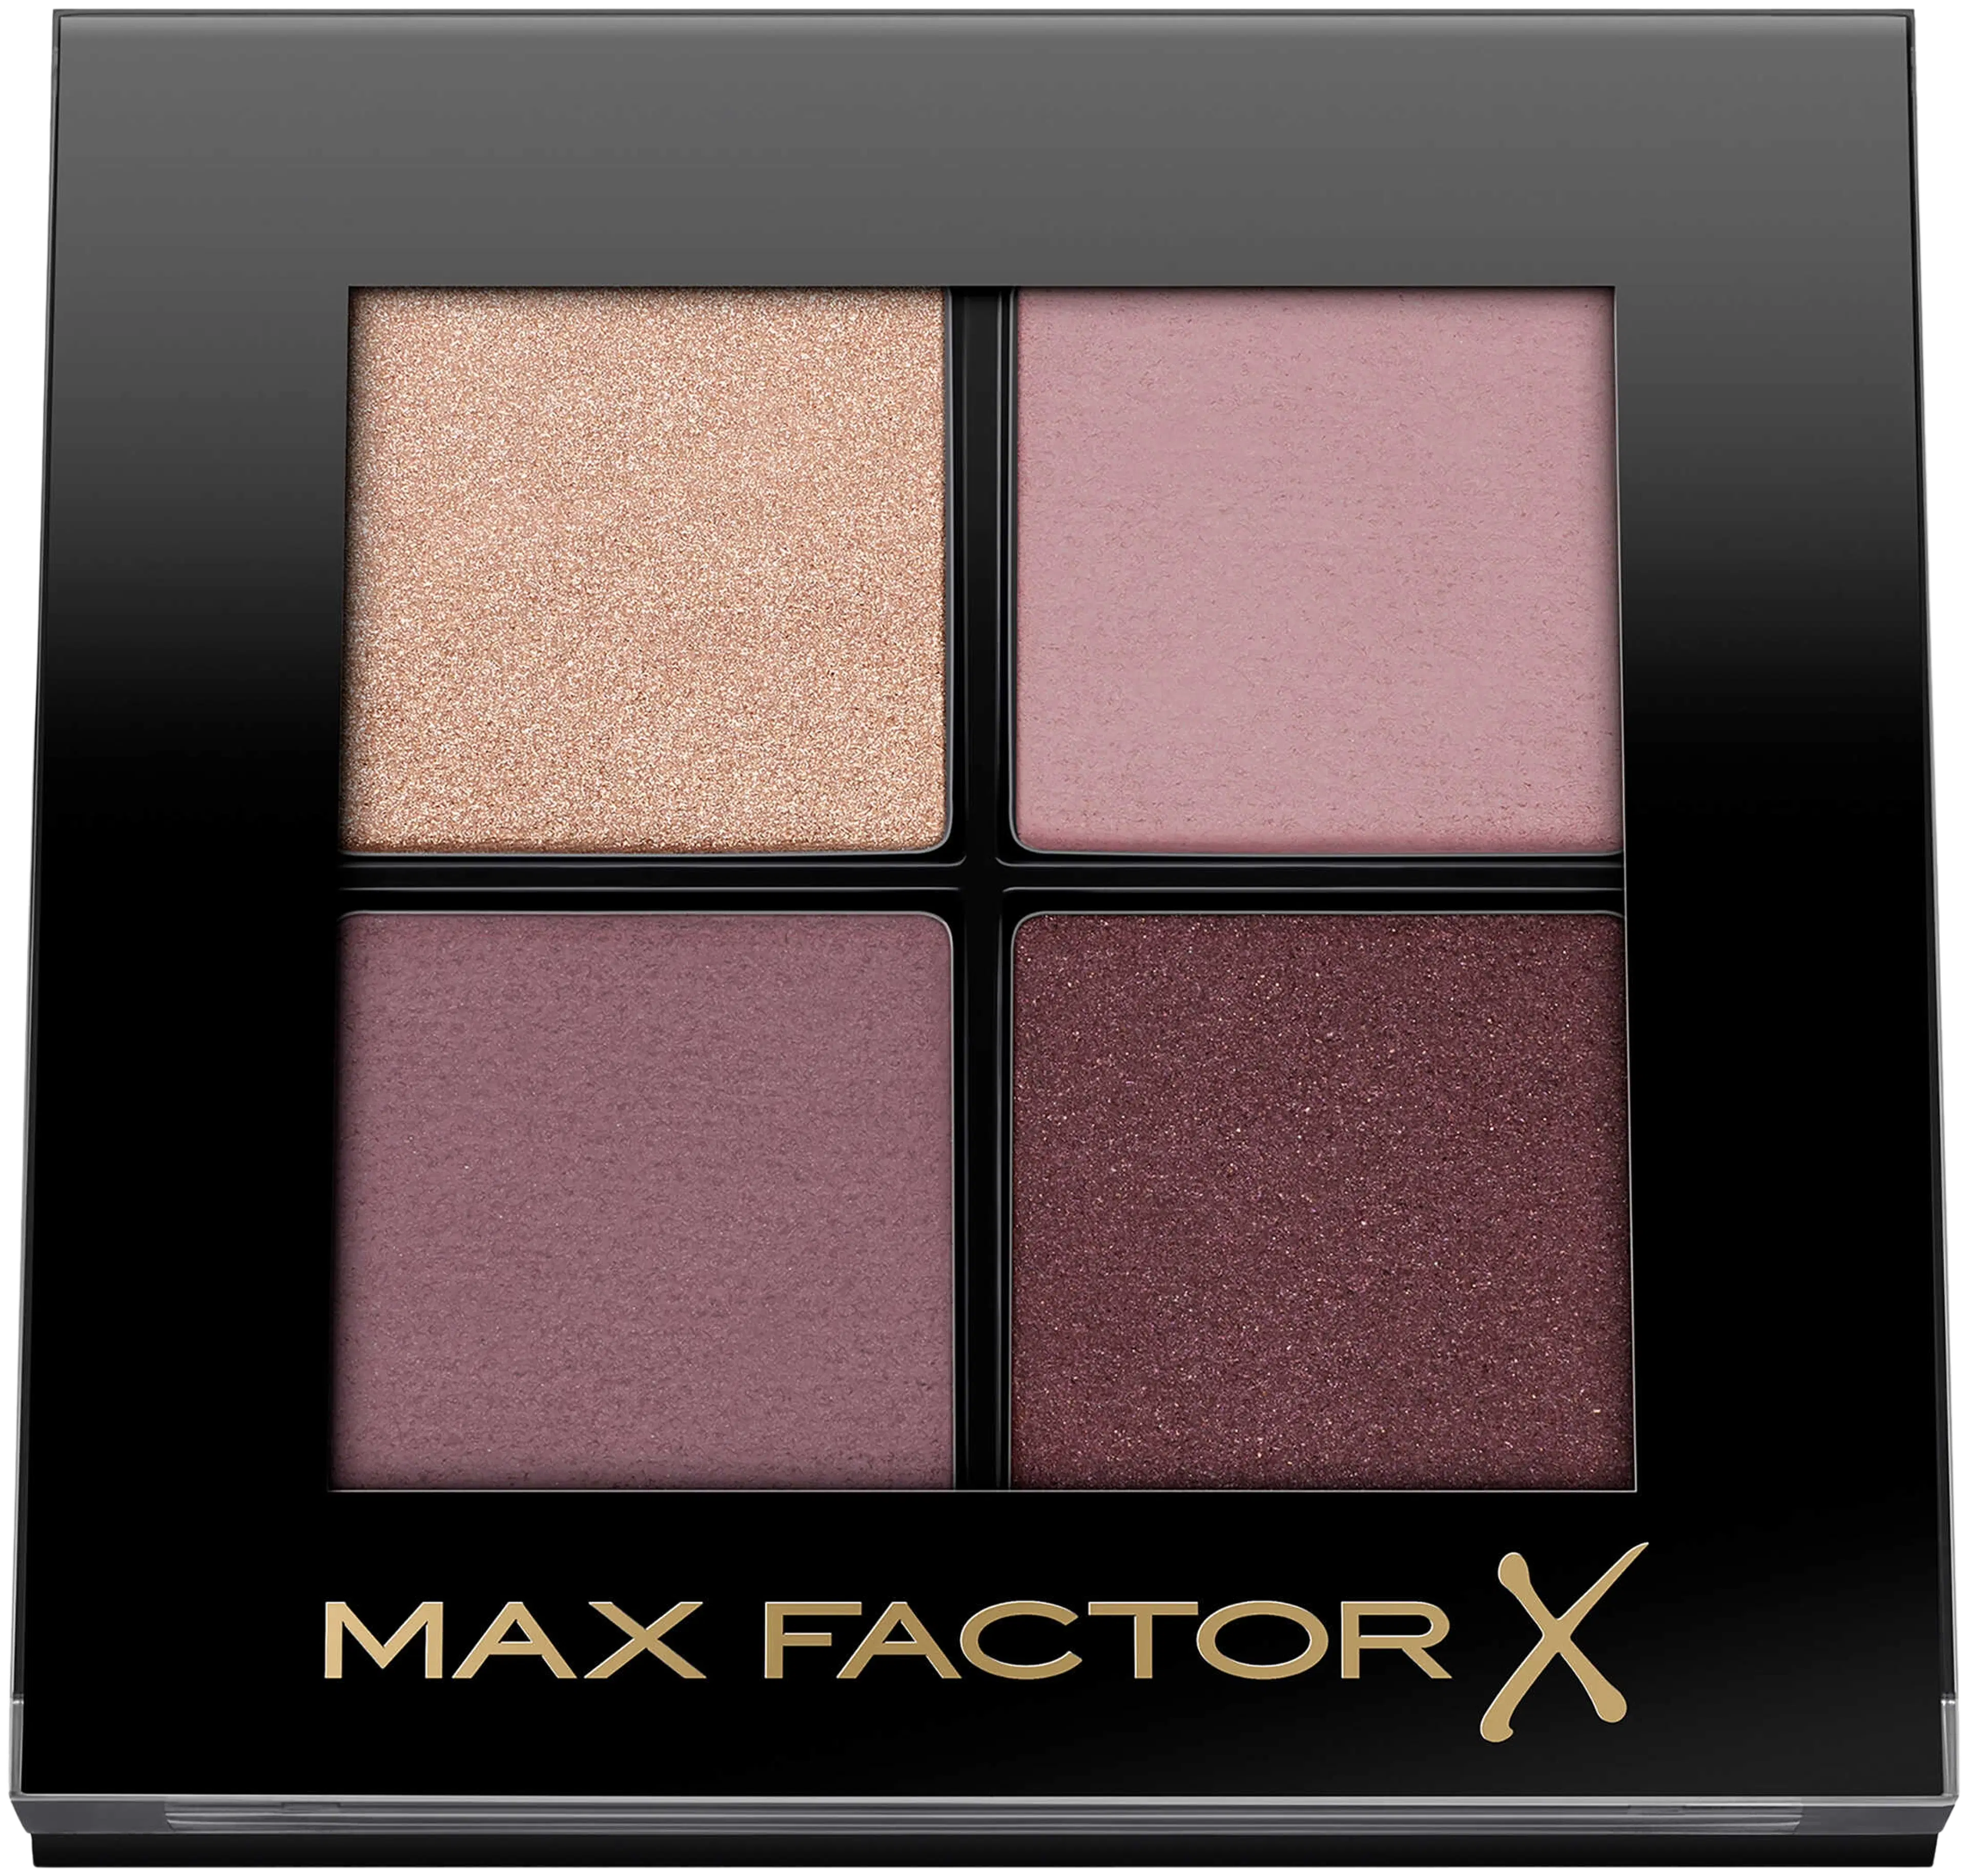 Max Factor Colour X-pert Soft Touch Palette 02 Crushed Bloom 4,3 g luomiväripaletti